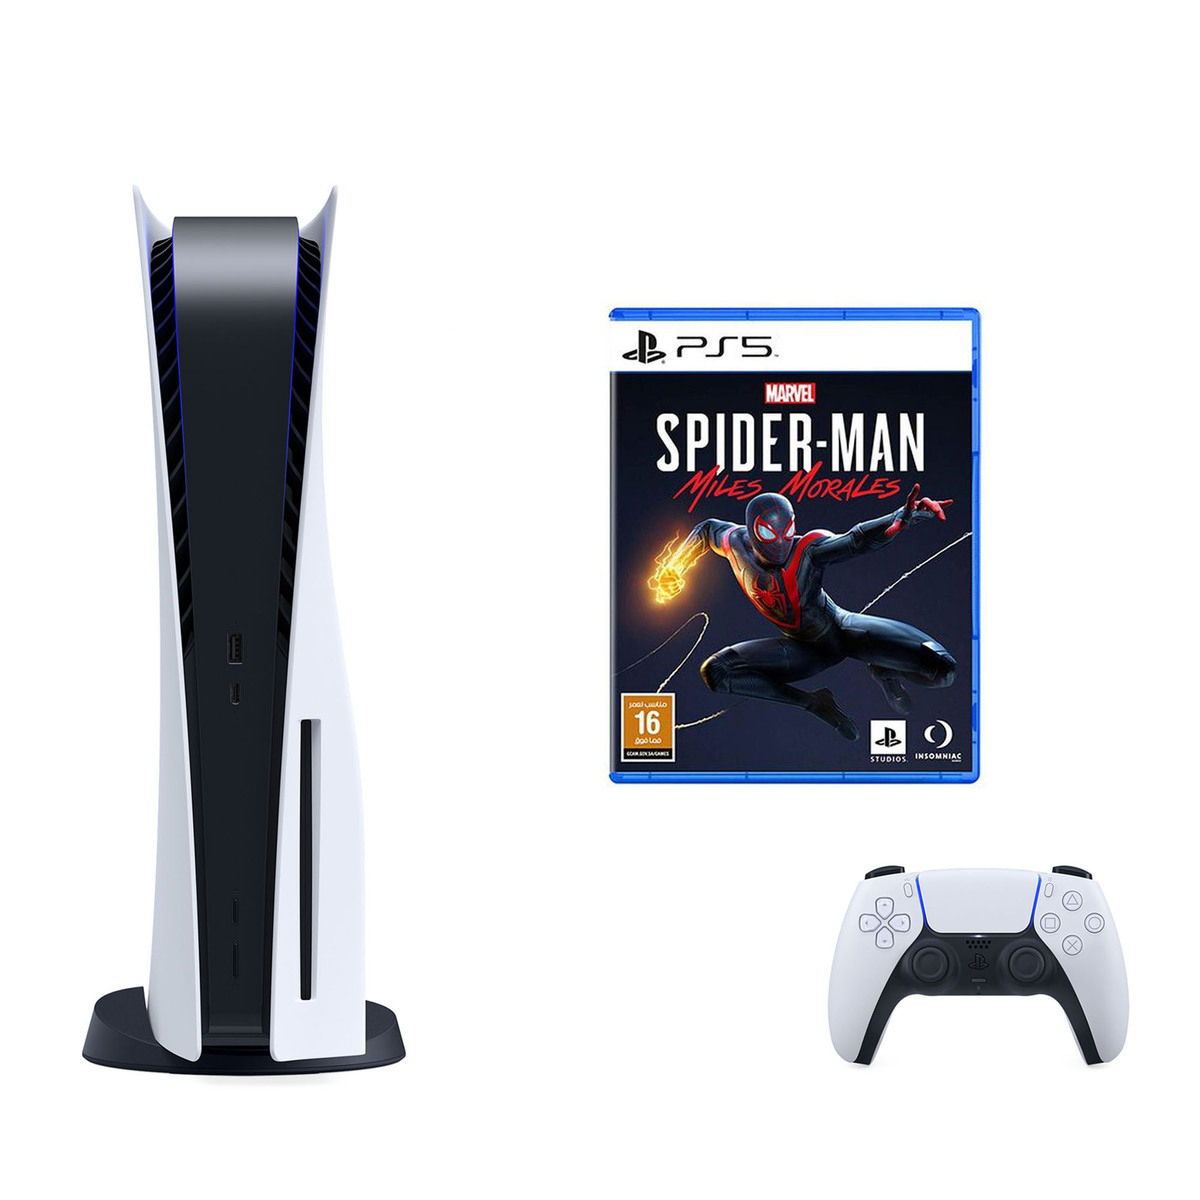 Consola Play Station 5, Spiderman Edition, PS5, 825GB